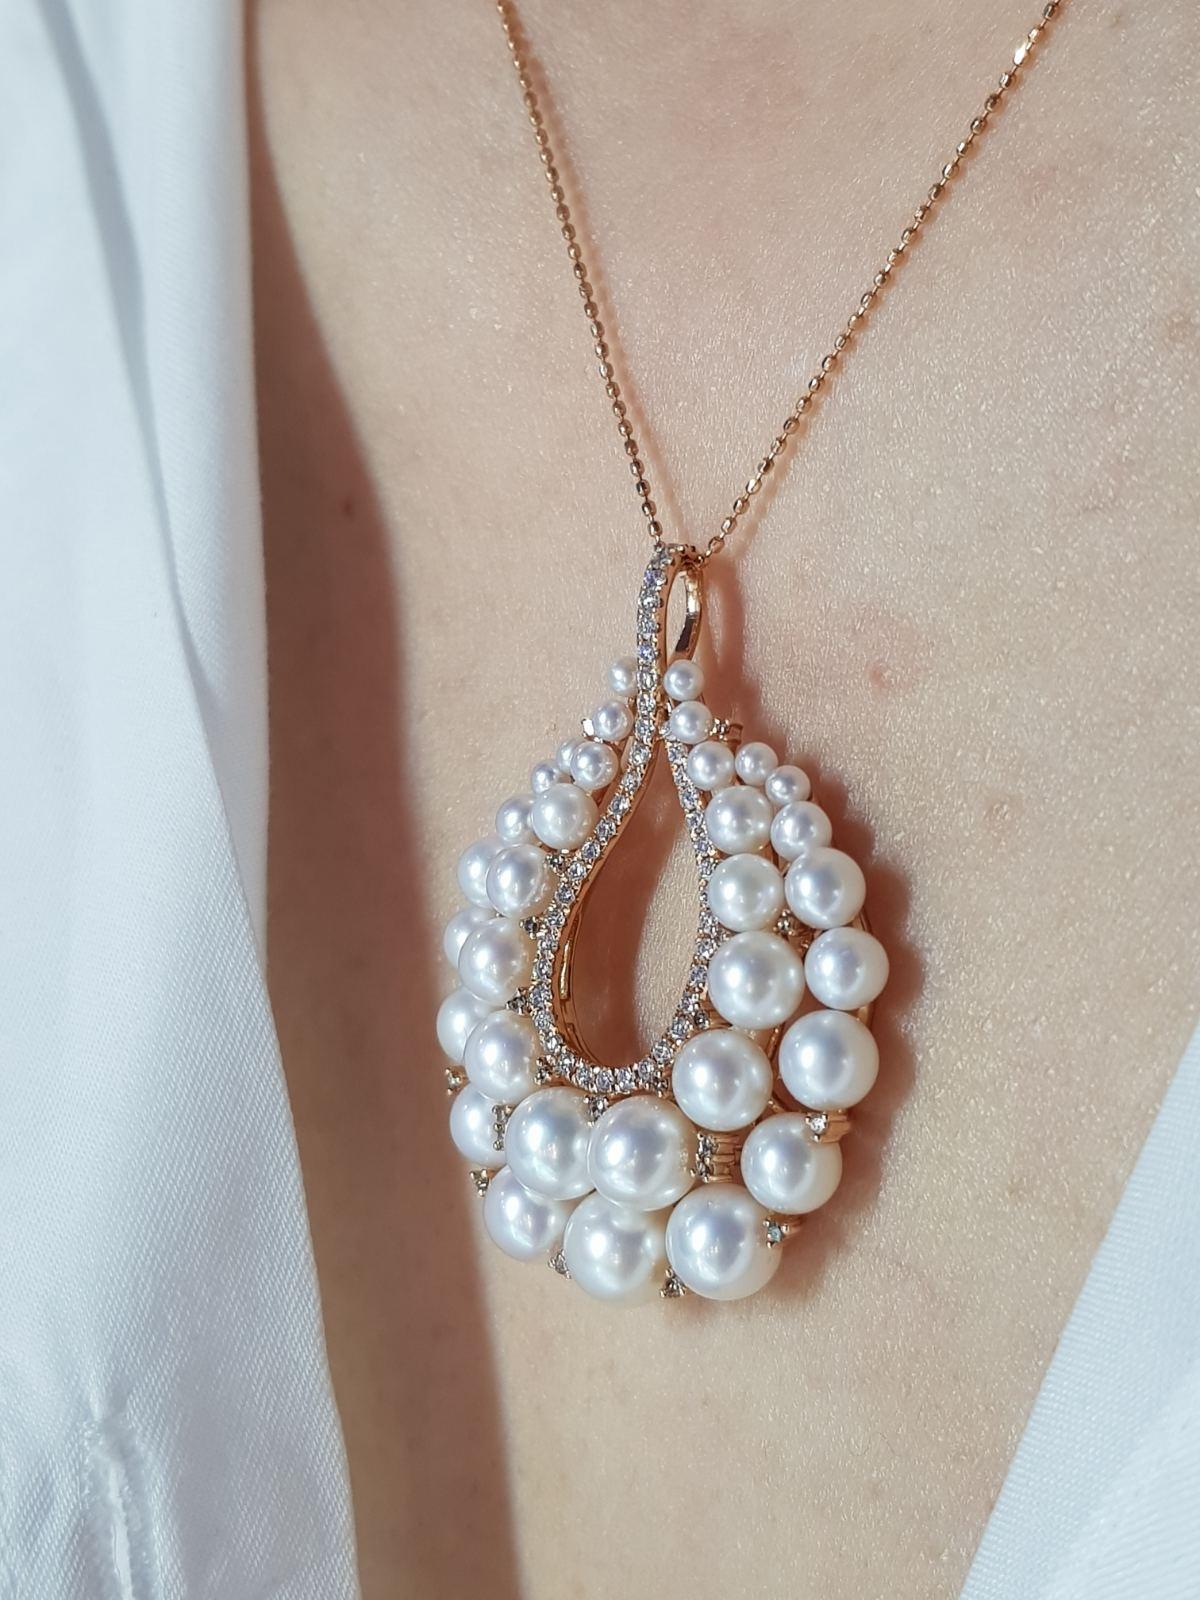 Necklace Yellow Gold 18 K (Matching Earrings and Ring Available)
Diamond 42-Round 57-0,42-4/6-
Diamond 23-Round 57-0,16-7/7-
Pearl d 2,0-6,5 33-23,67 ct
Weight 9.55 gram

With a heritage of ancient fine Swiss jewelry traditions, NATKINA is a Geneva